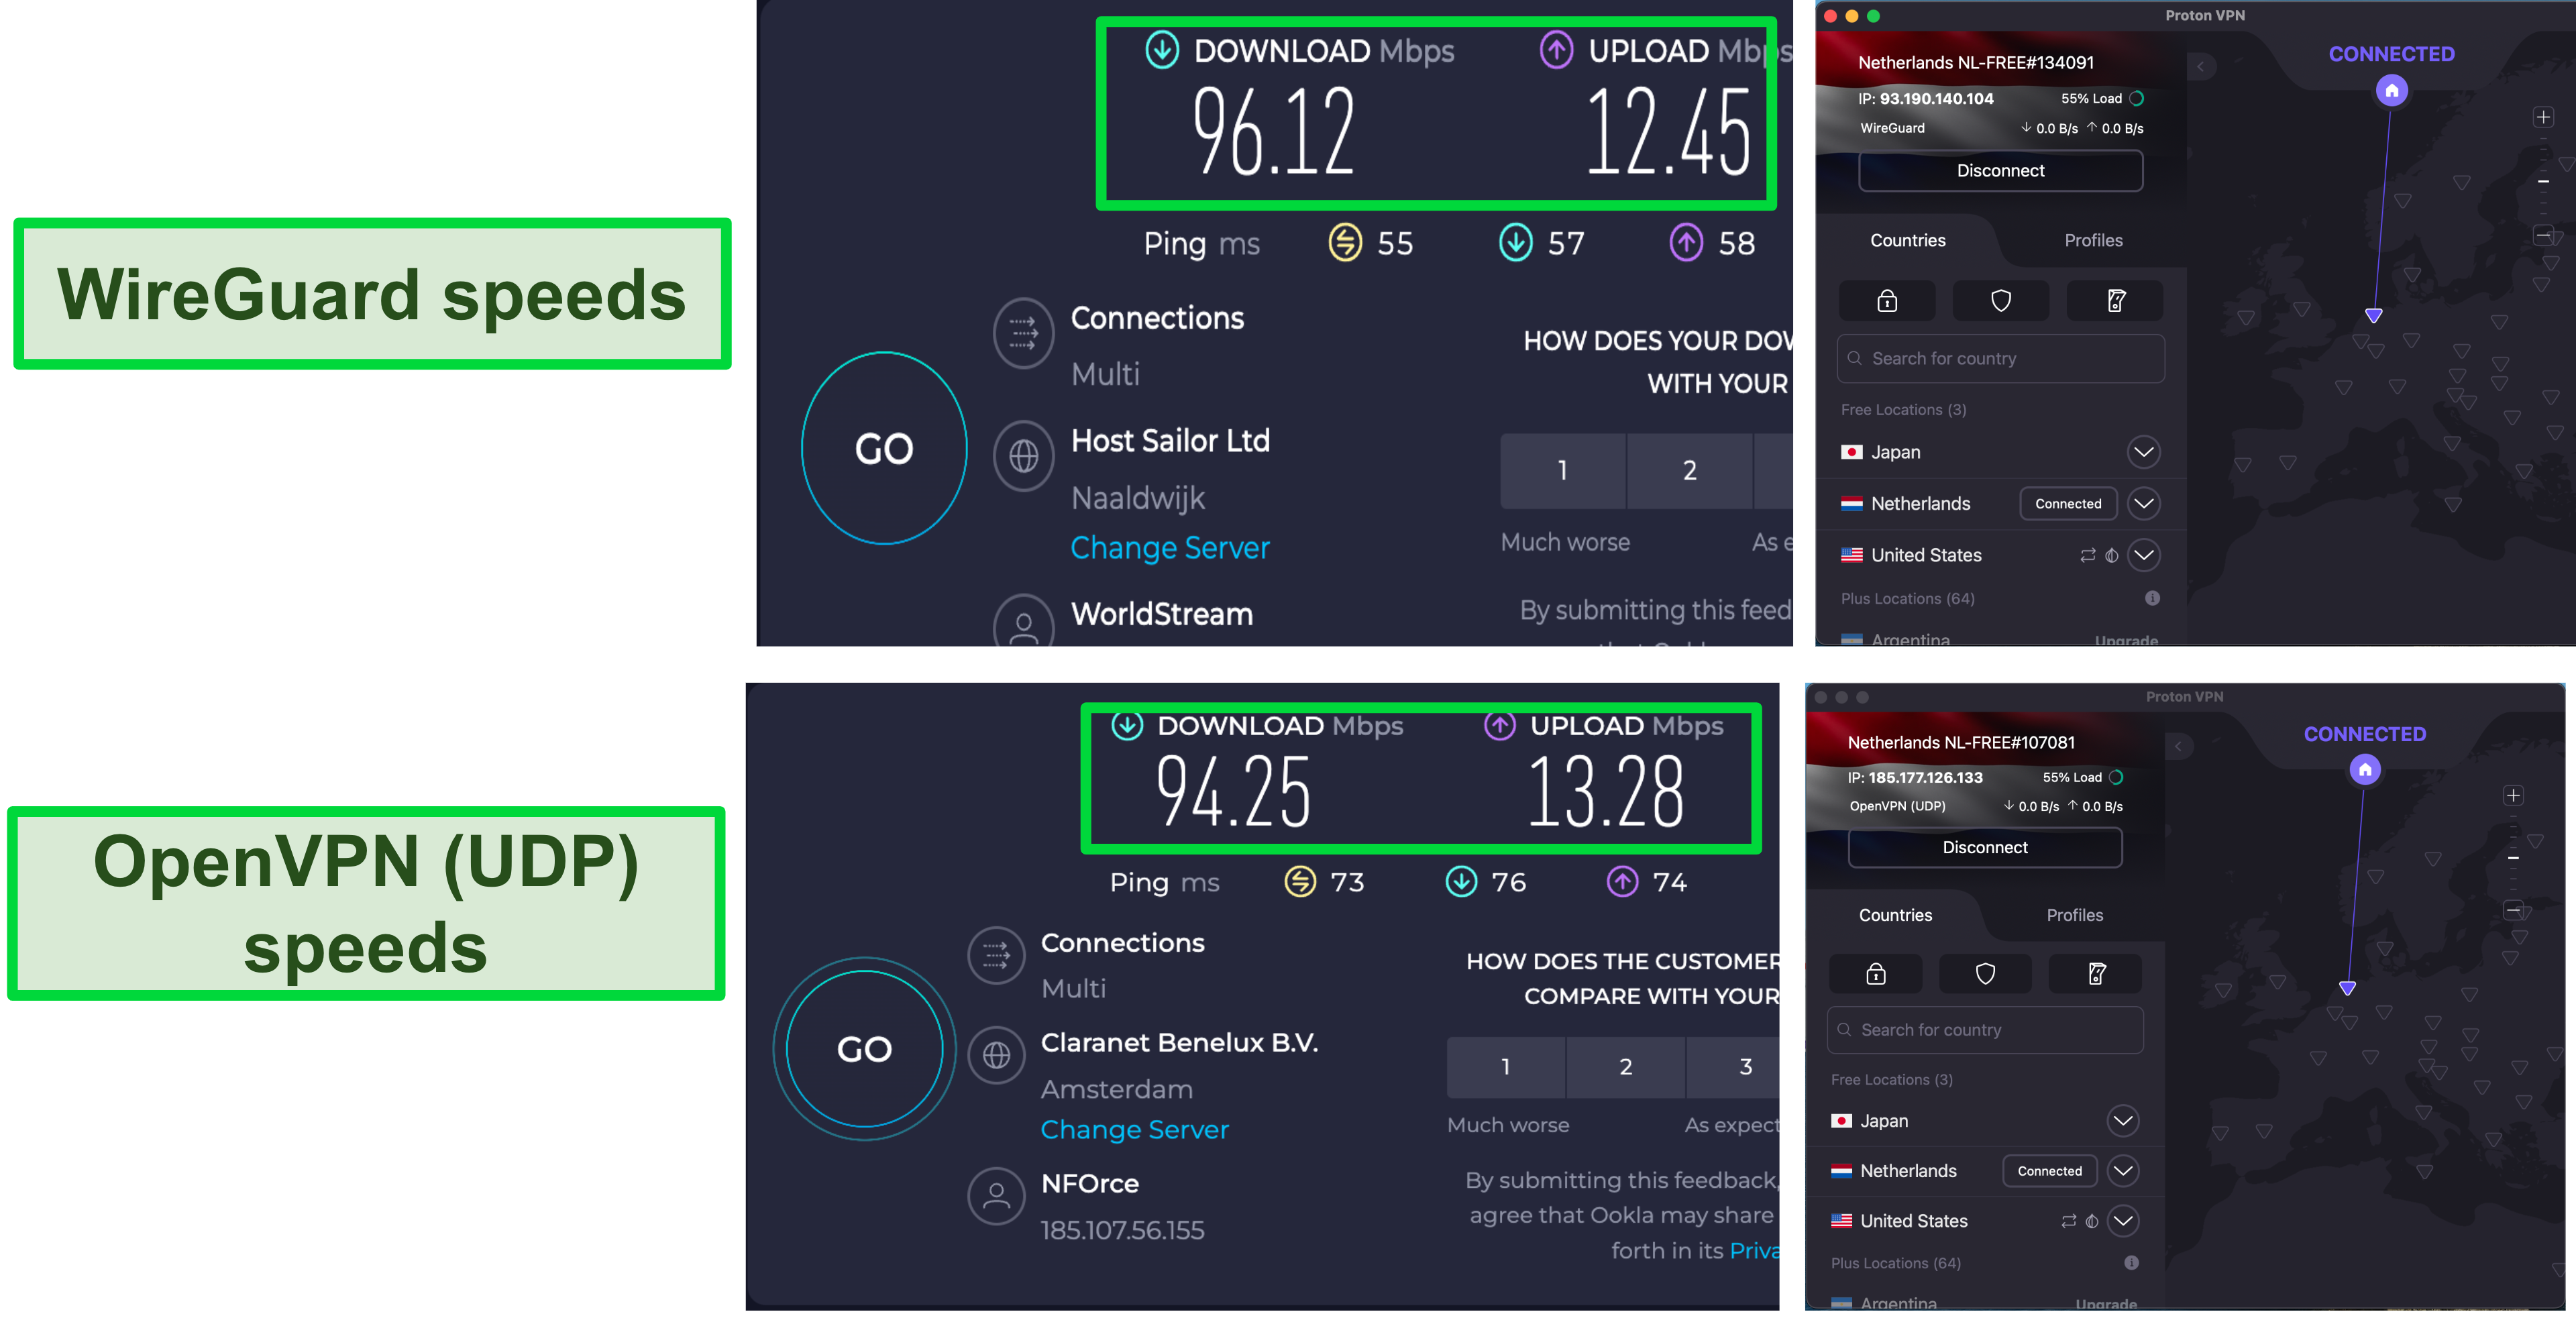 Screenshots of speed tests with ProtonVPN connected using WireGuard and OpenVPN (UDP) protocol.